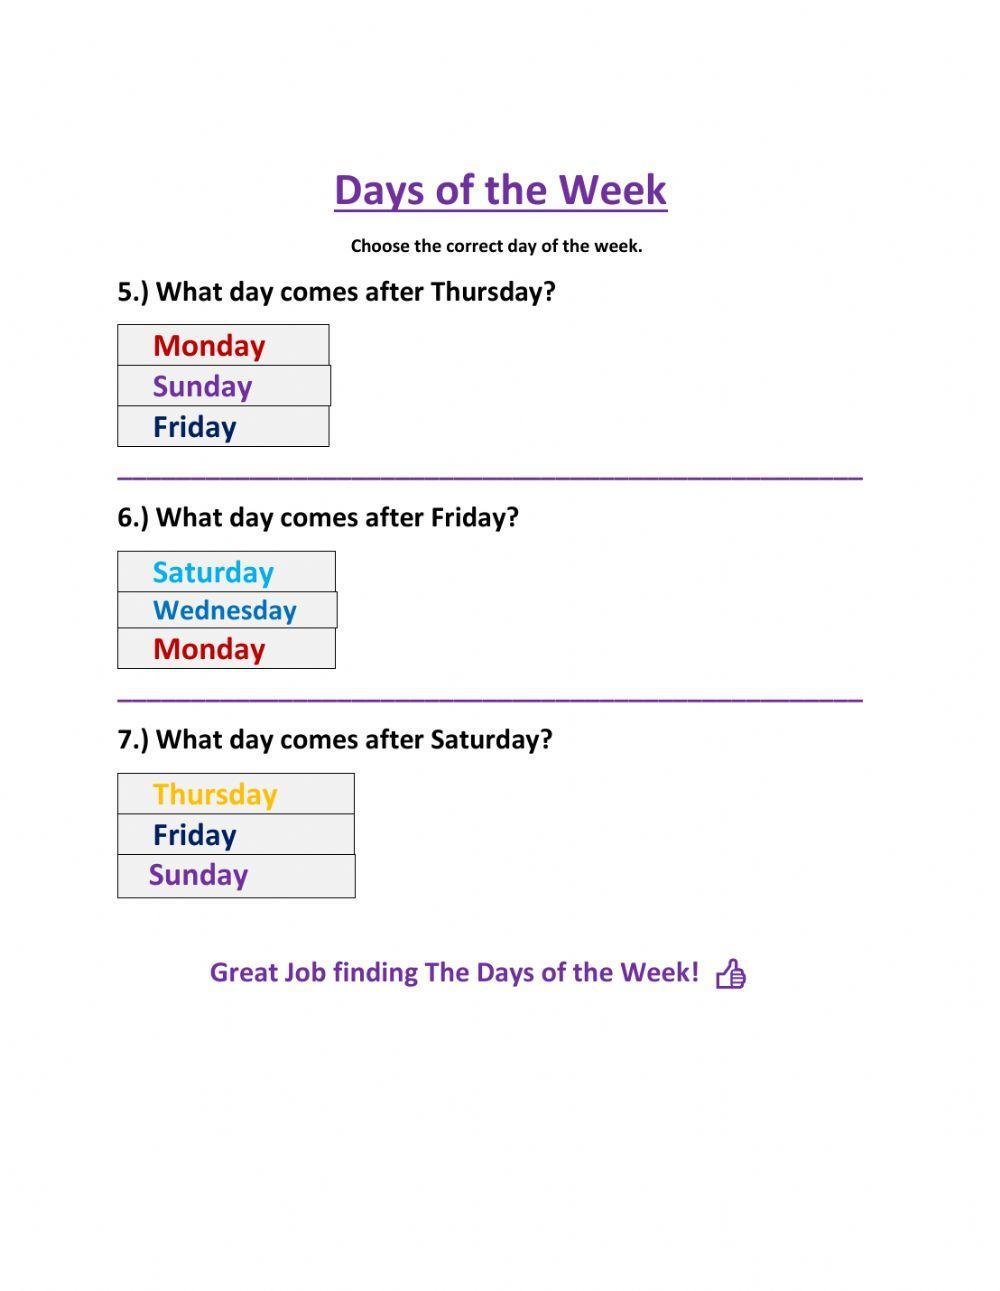 Days of the week-3